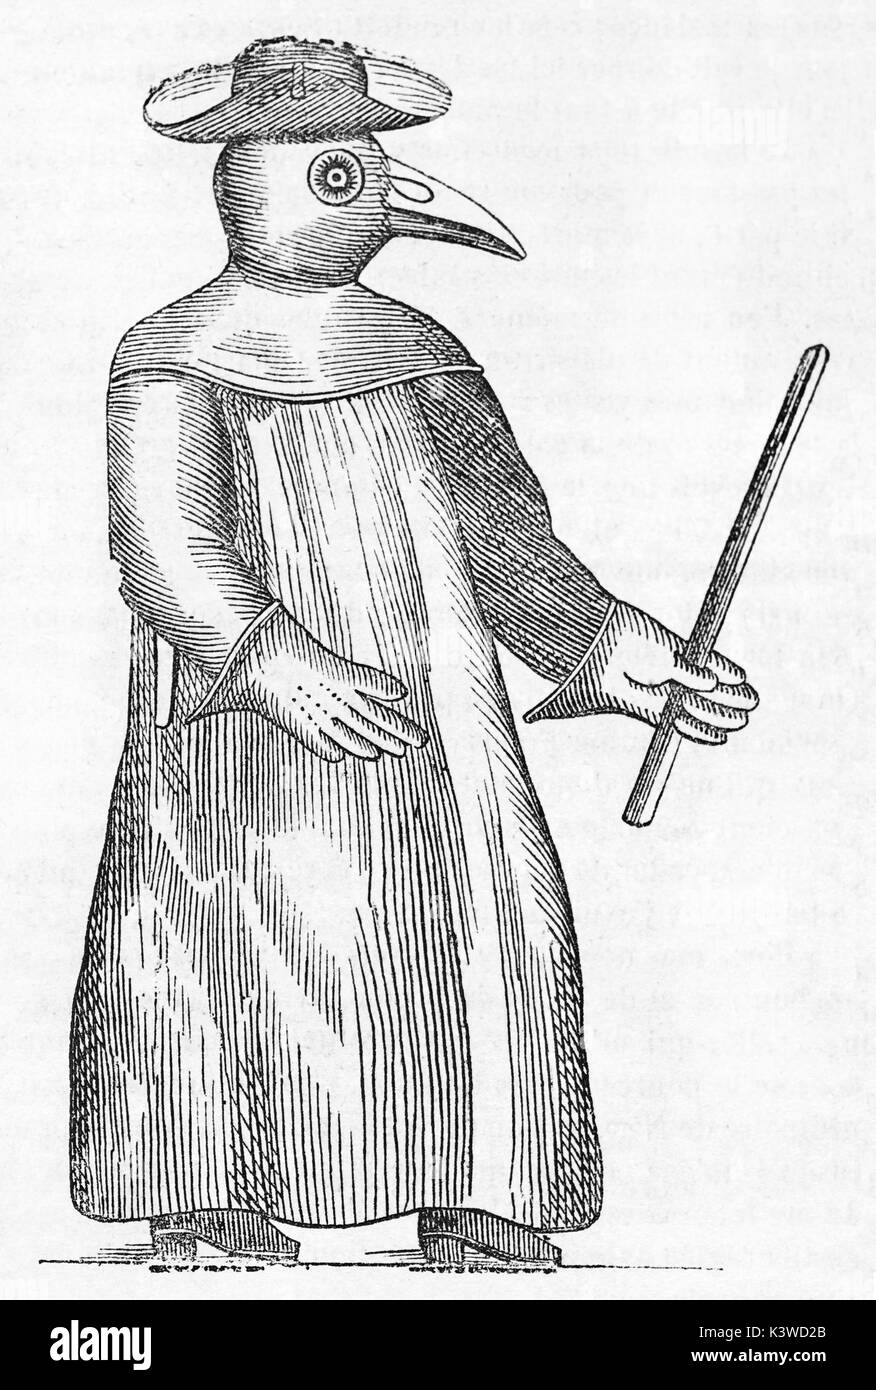 Old illustration of a plague doctor wearing a protective suit. By unidentified author, published on Magasin Pittoresque, Paris, 1841 Stock Photo